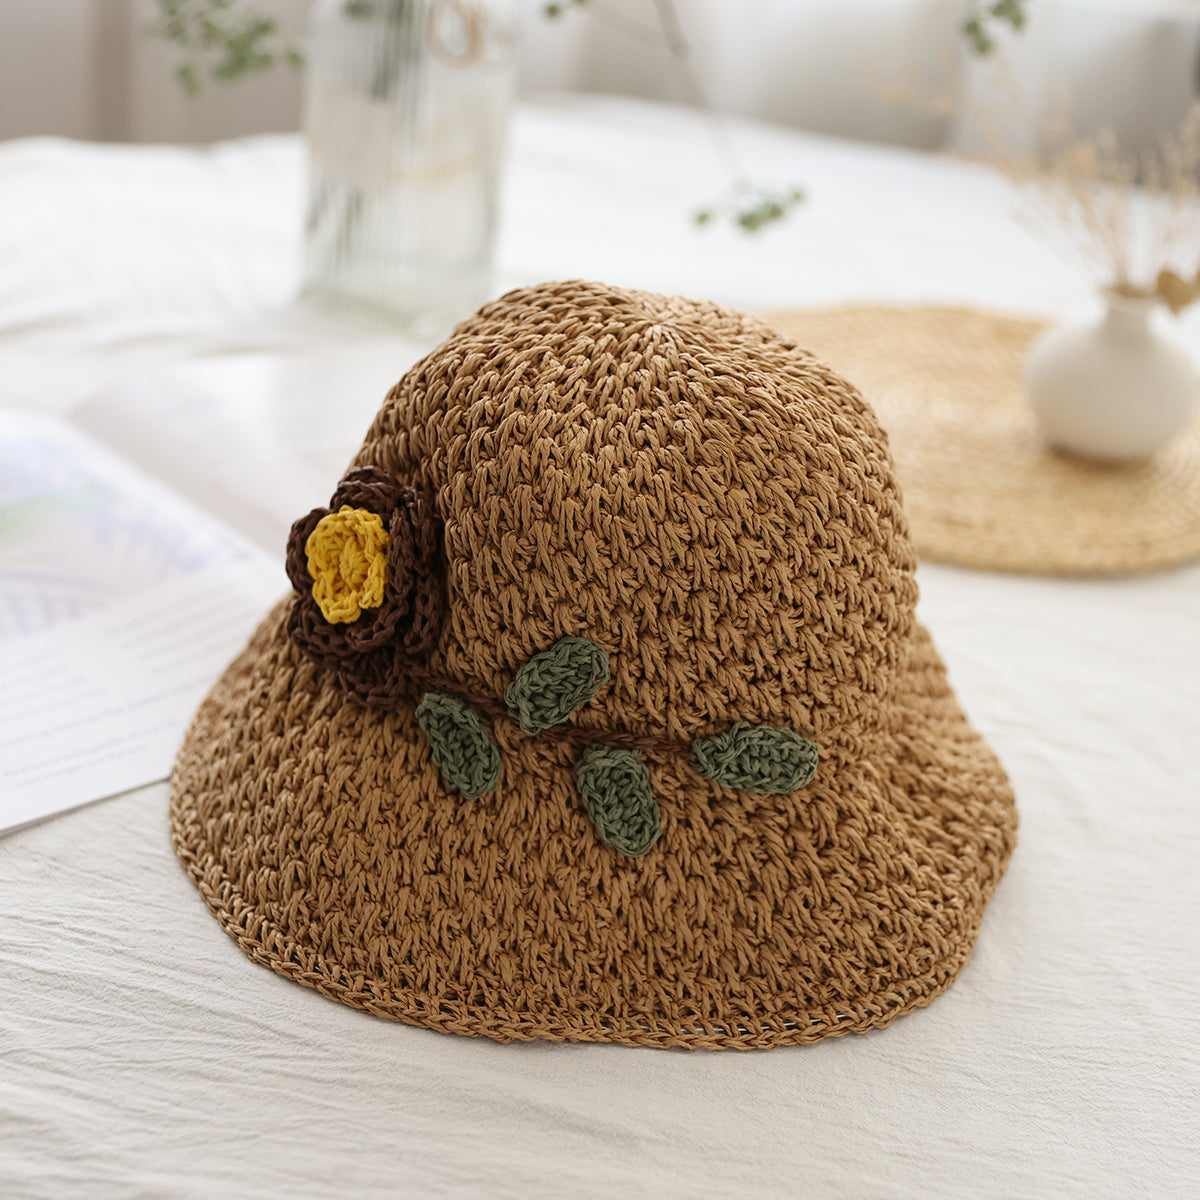 Women Retro Floral Embroidery Sun Straw Hat Jul 2022 New Arrival One Size Brown 